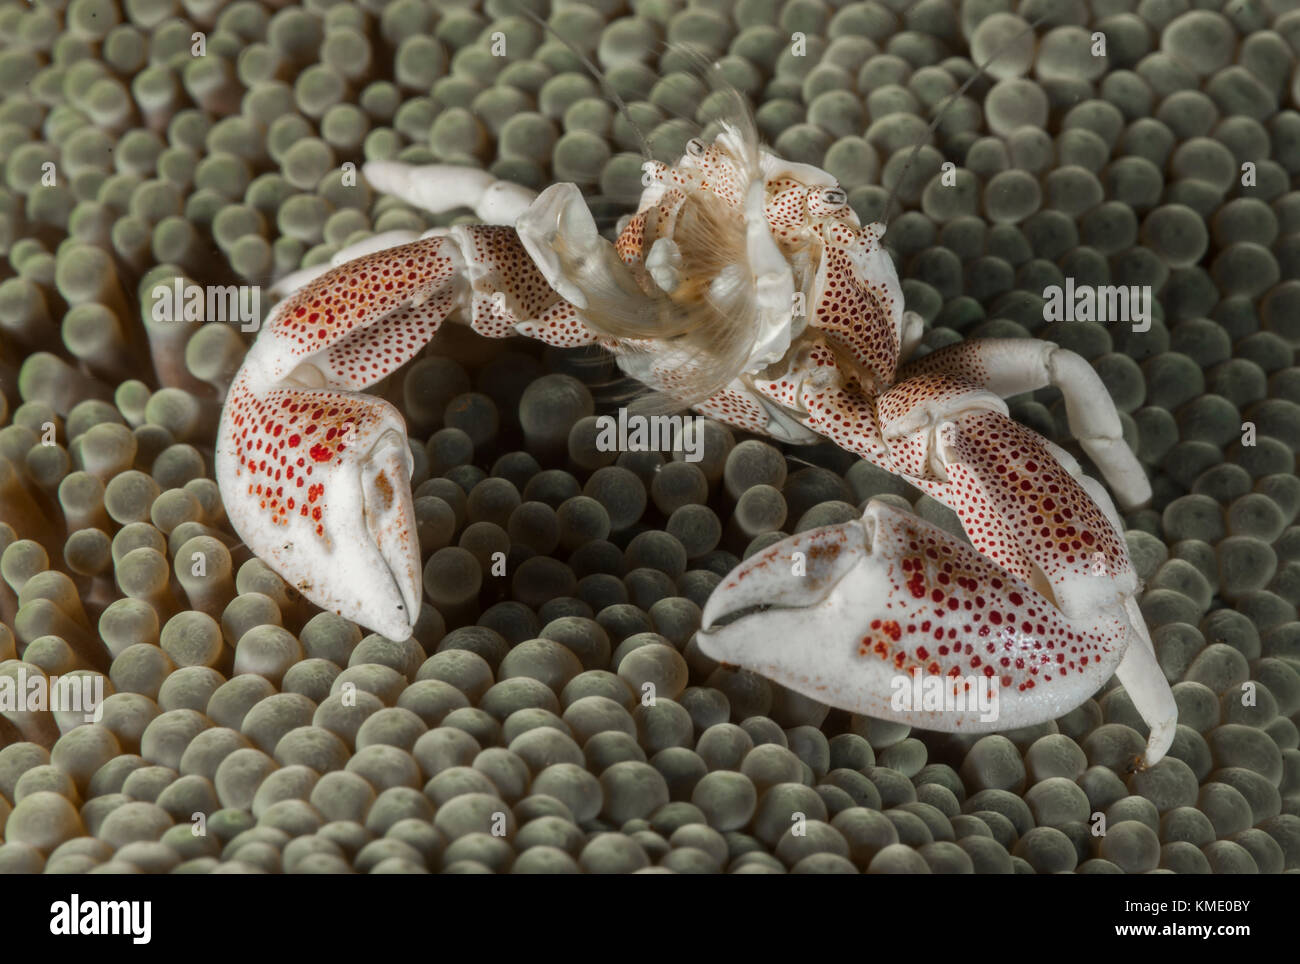 Porcelain crab on a sea anemone Stock Photo